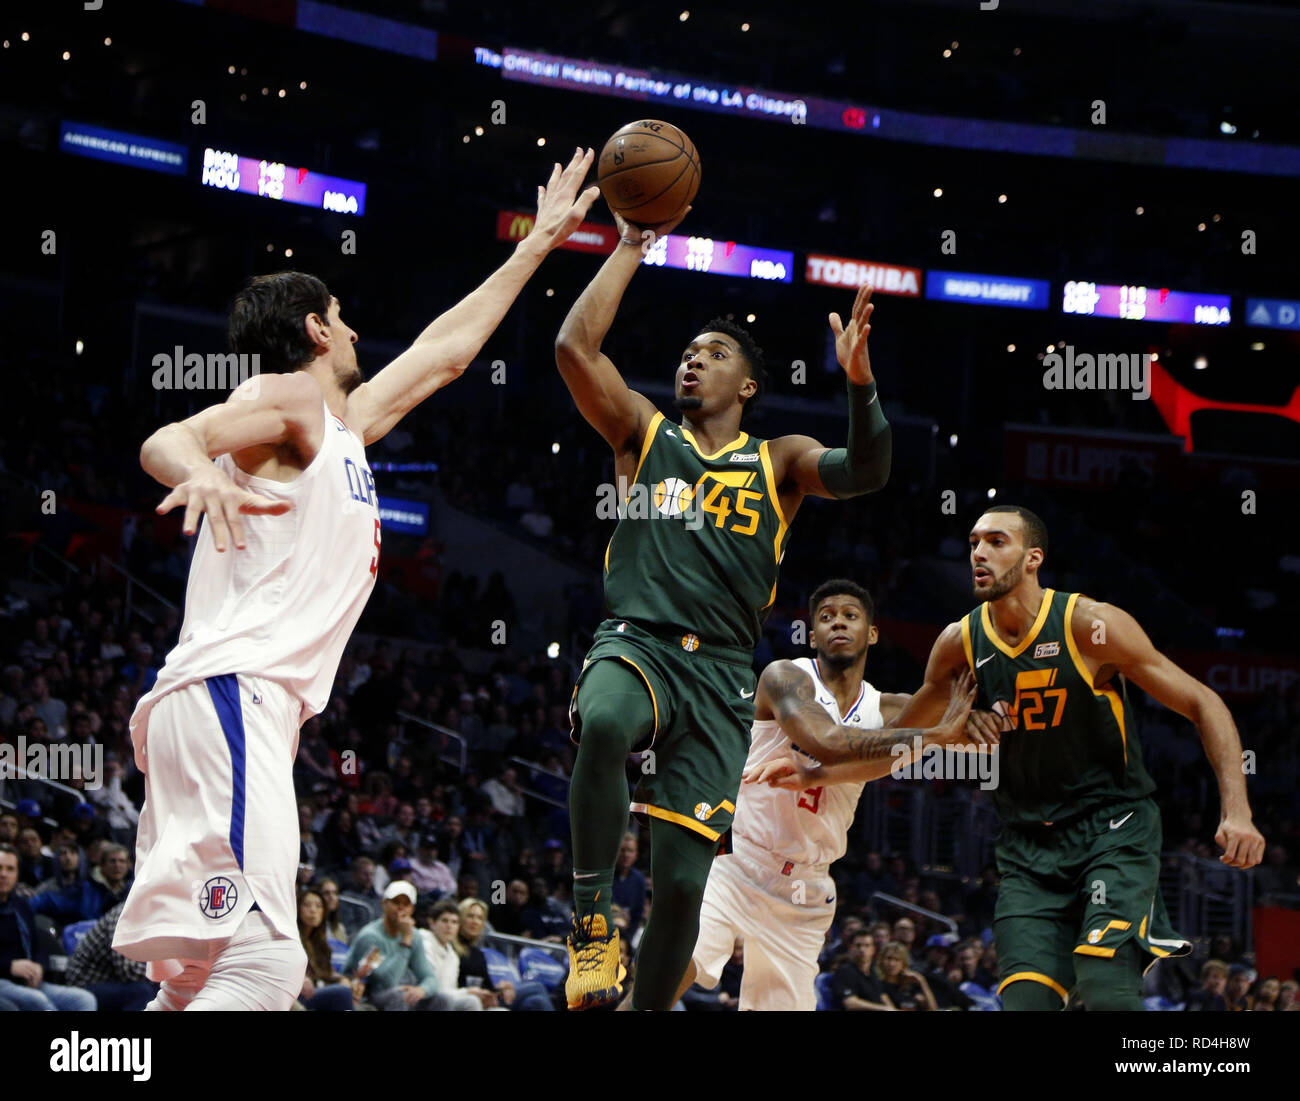 Los Angeles, California, USA. 16th Jan, 2019. Los Angeles Clippers' Boban  Marjanovic (51) is defended by Utah Jazz's Rudy Gobert (27) during an NBA  basketball game between Los Angeles Clippers and Utah